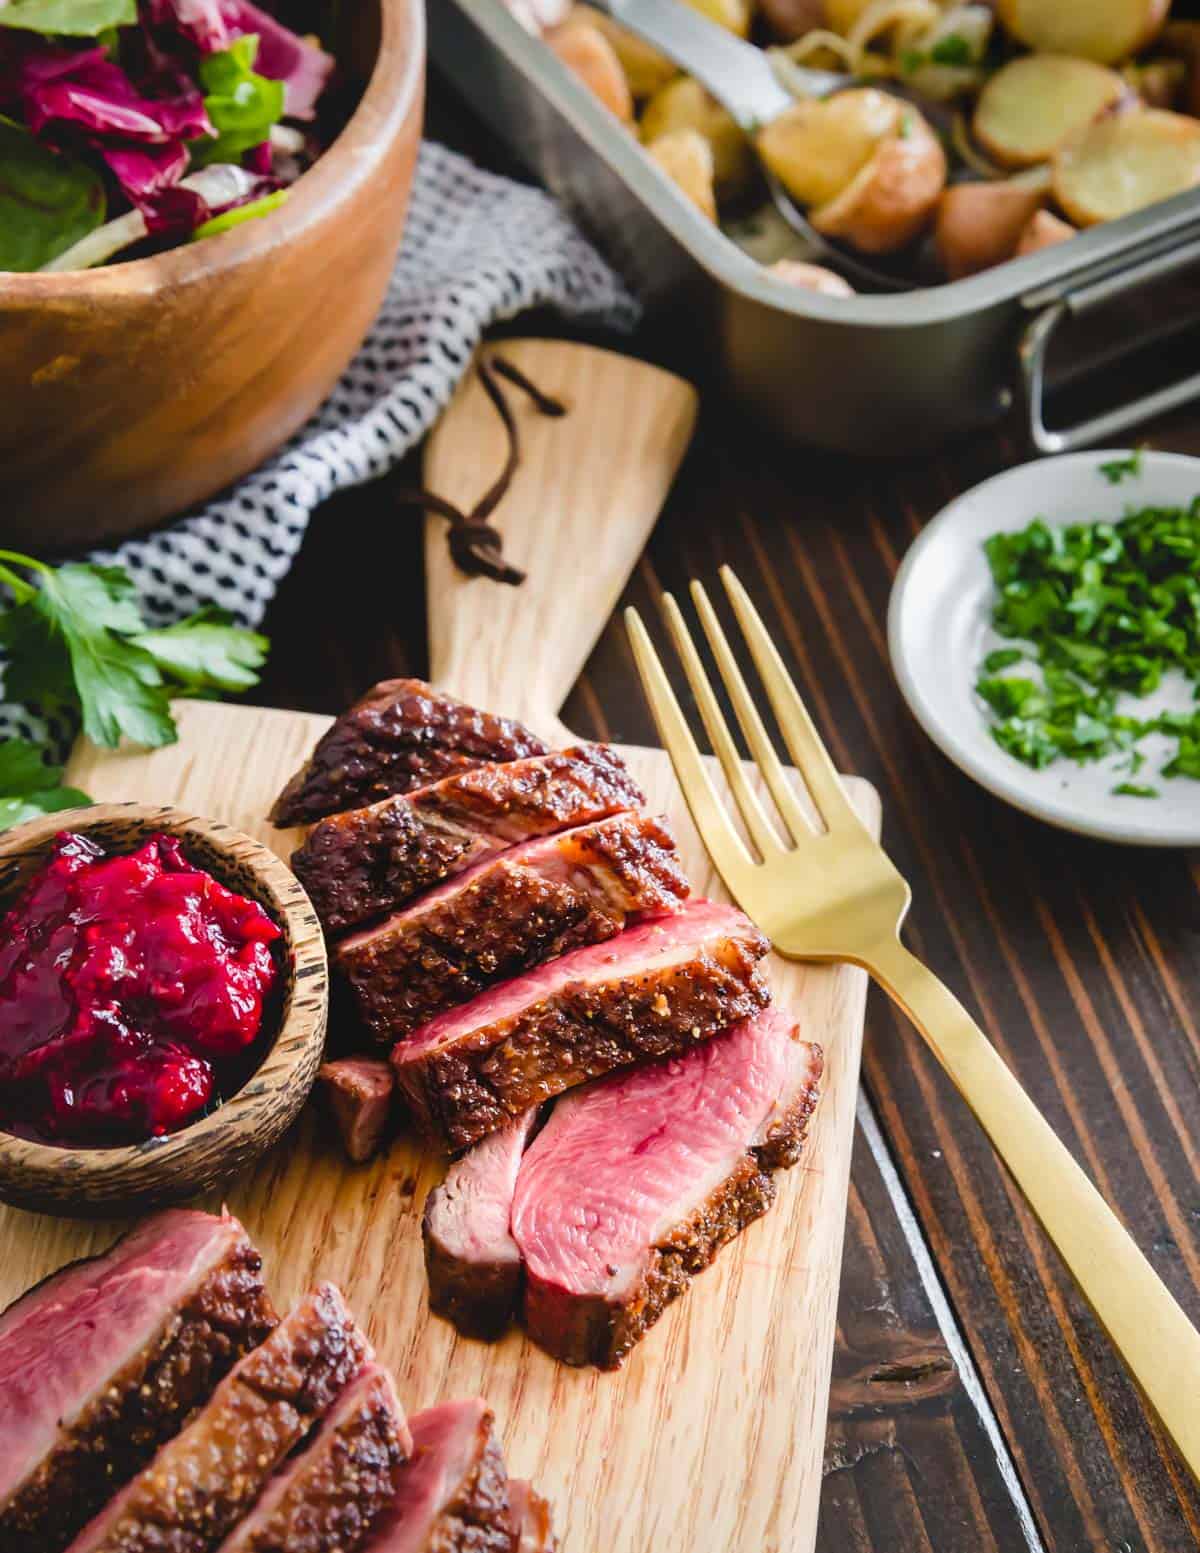 <p>Discover the elegance of pan-seared duck breast with this straightforward recipe. Using a few simple ingredients, this dish is perfect for a special dinner or entertaining guests. It demonstrates how wild game can be both luxurious and easy to prepare, with a result that’s far superior to any store-bought meat.<br><strong>Get the Recipe: </strong><a href="https://www.runningtothekitchen.com/pan-seared-duck-breast/?utm_source=msn&utm_medium=page&utm_campaign=RTTKmsn">Pan Seared Duck Breast</a></p>